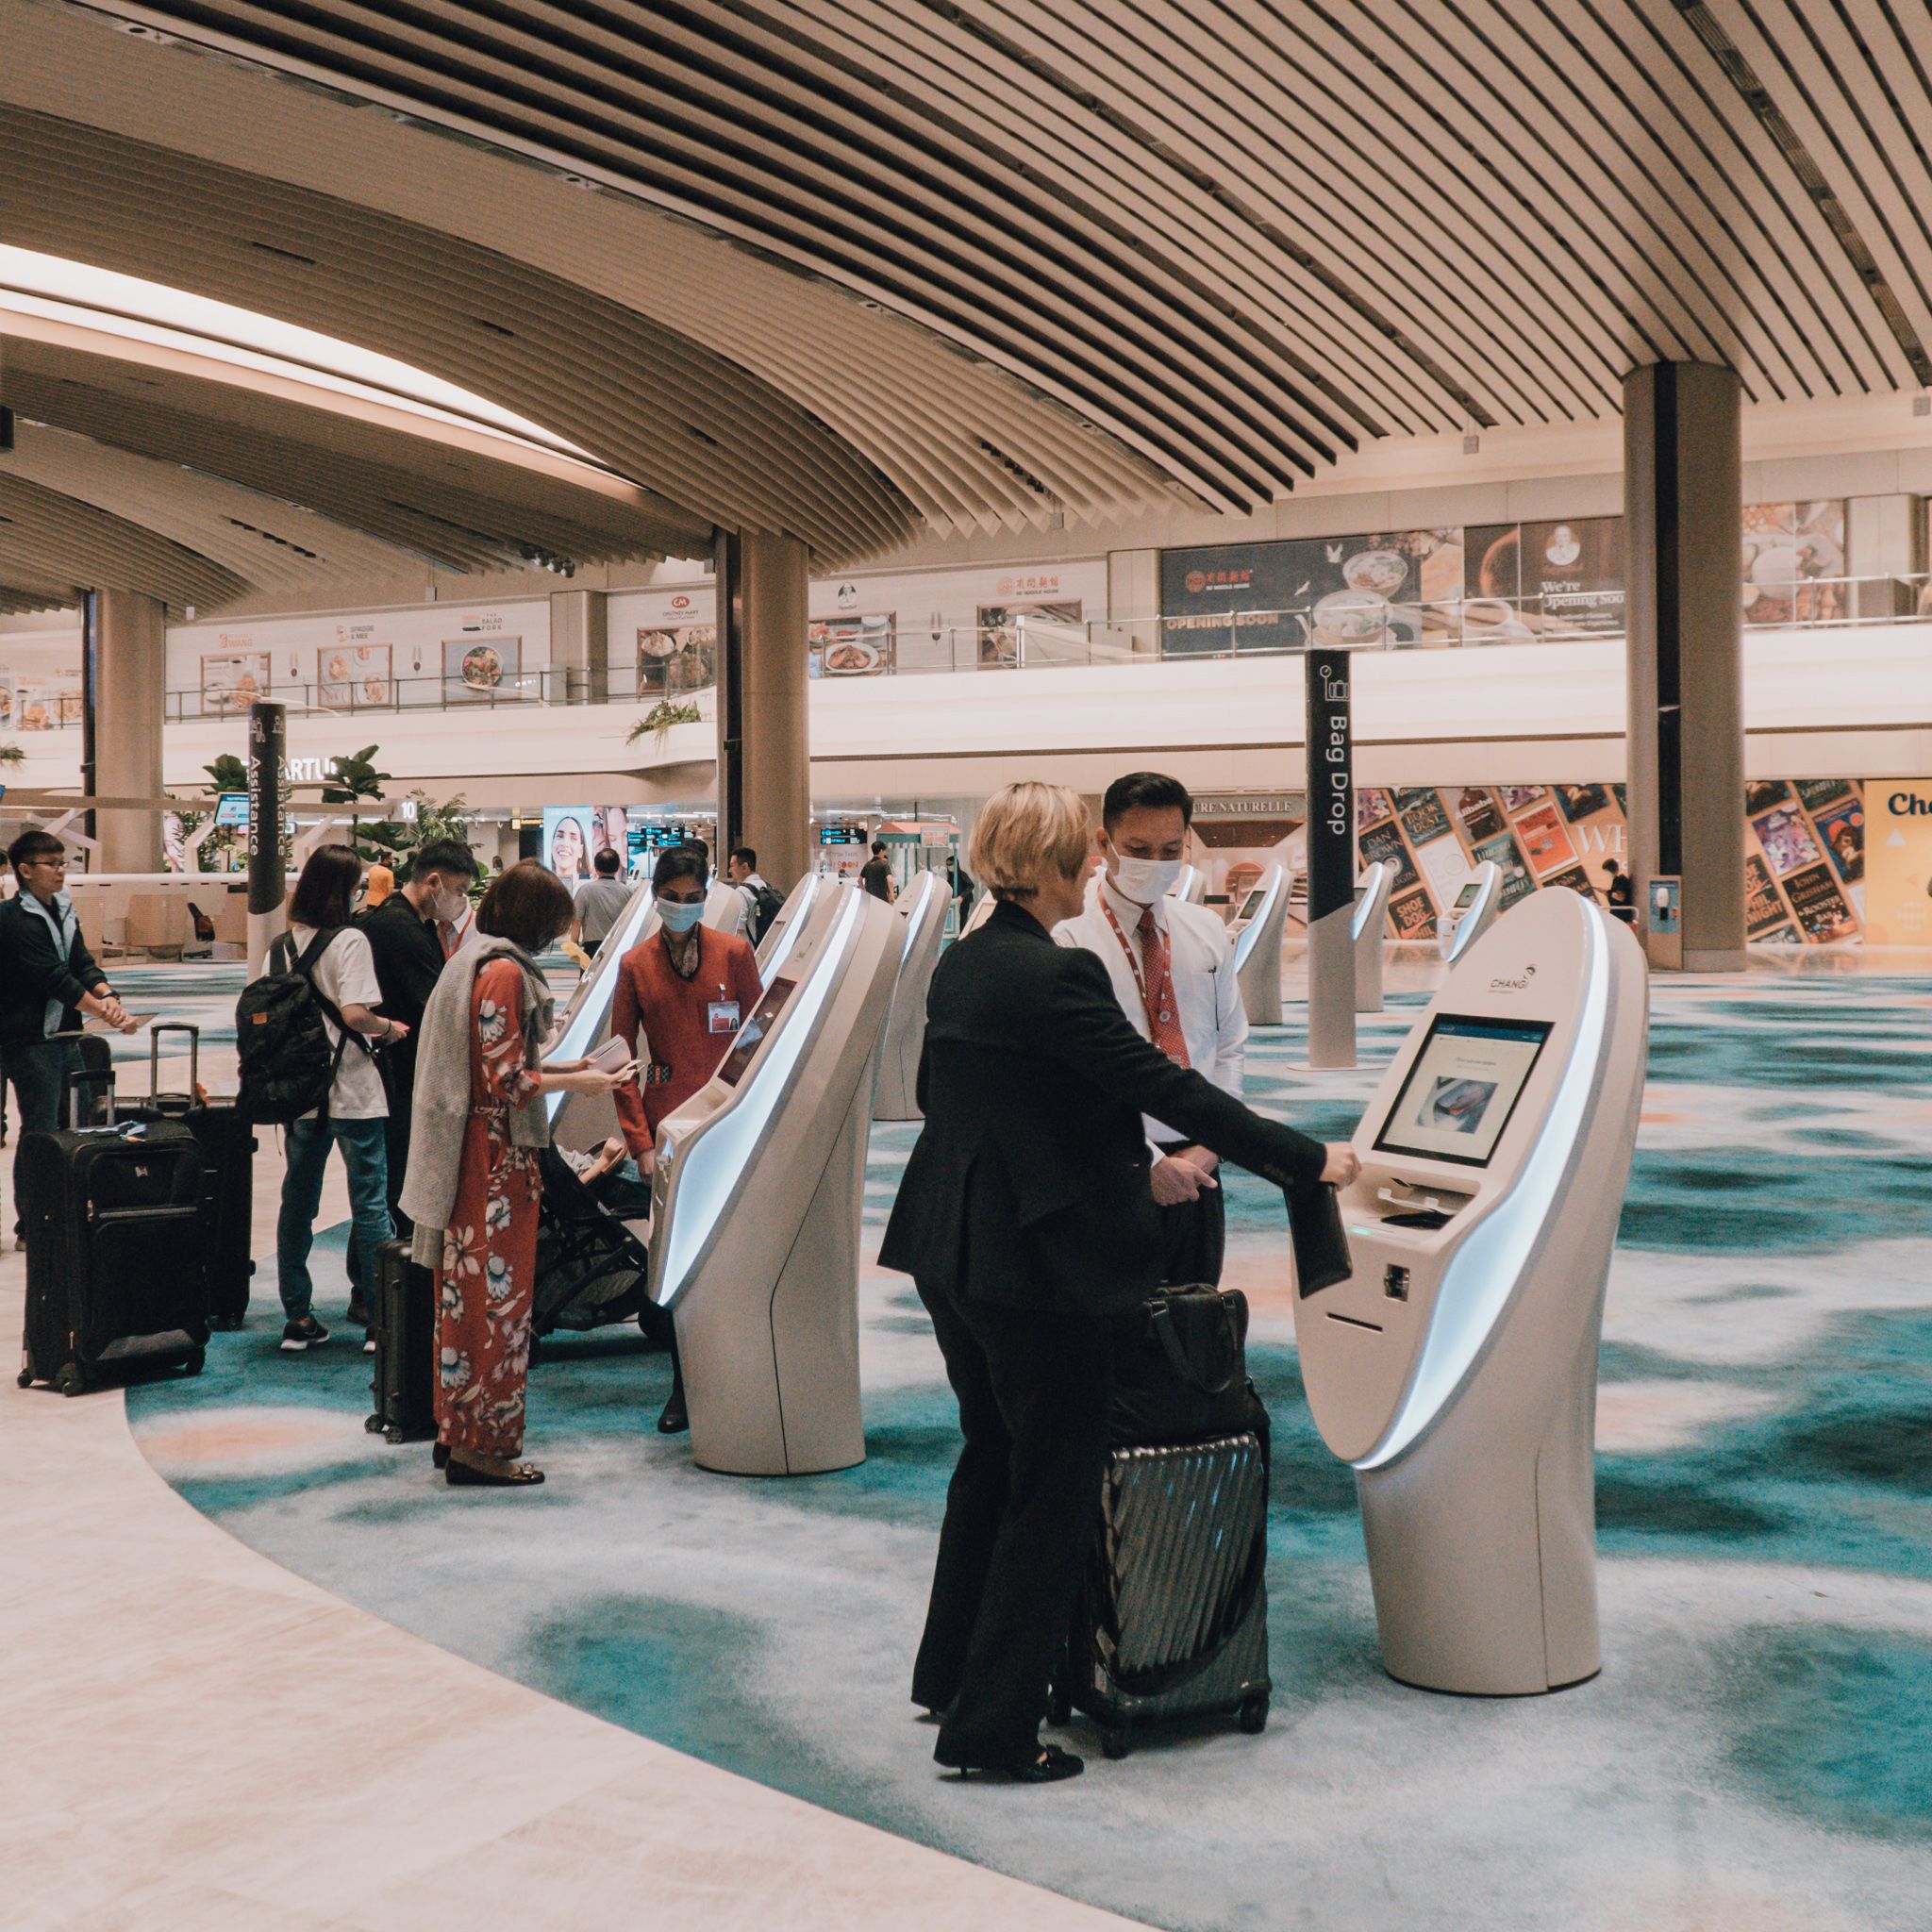 Singapore Changi T2 SIA passengers at the automated check-in kiosk